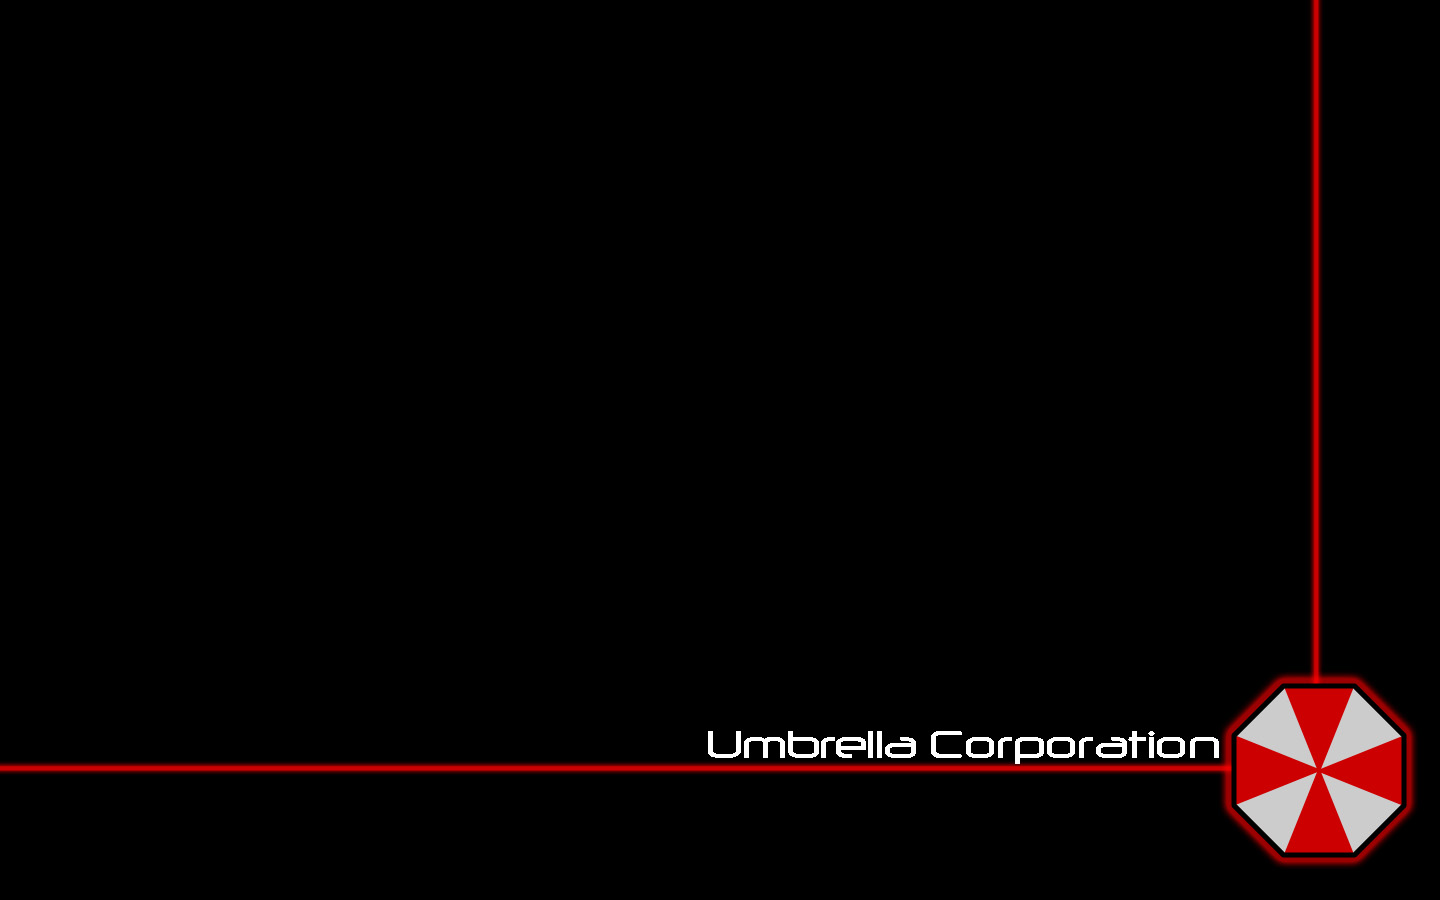 Umbrella Corp Wallpaper Download The Free Resident Evil Tattoo